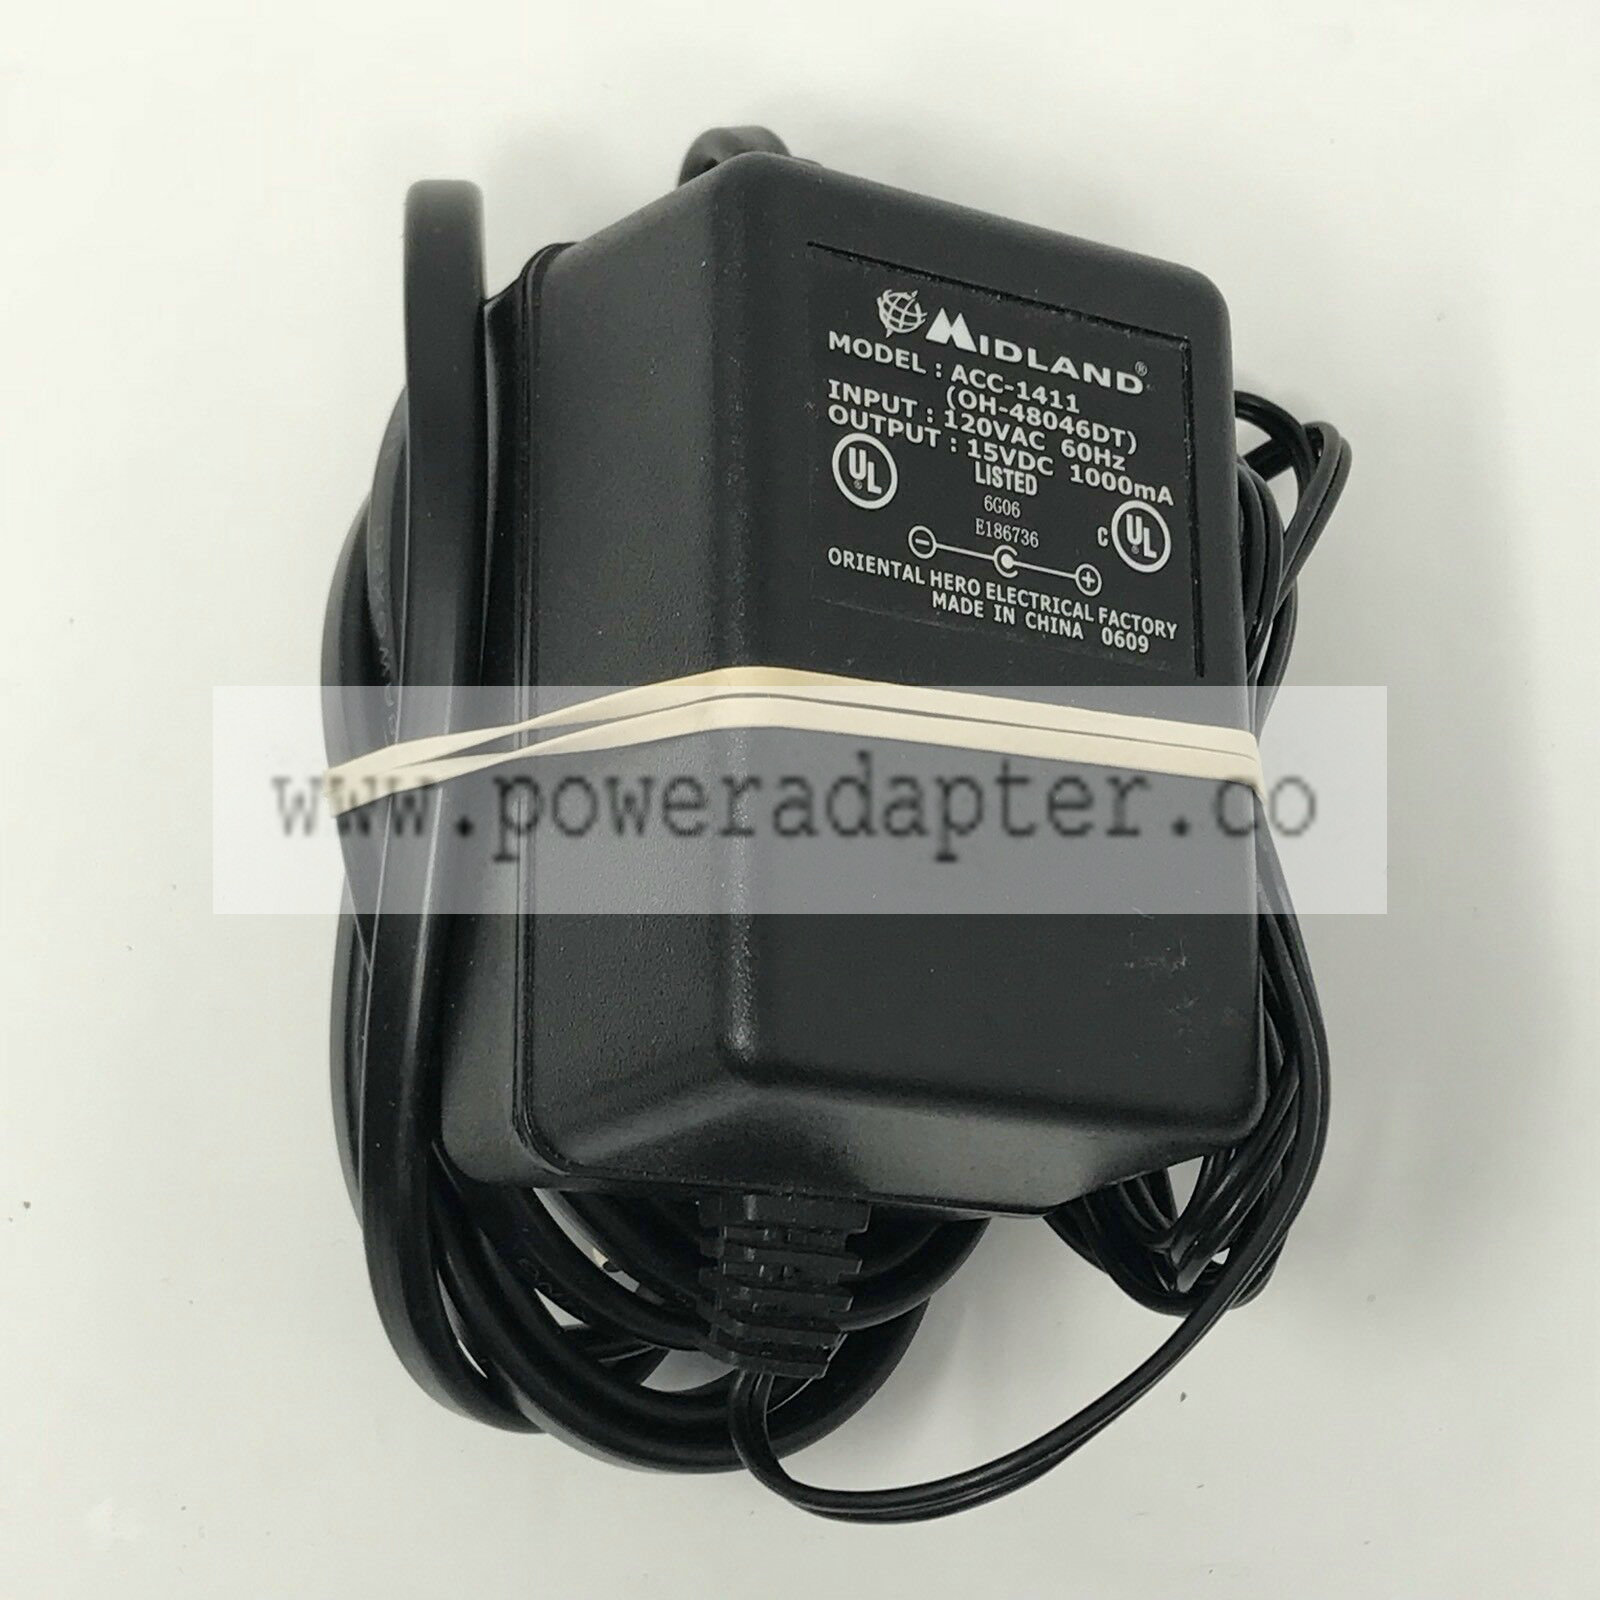 Midland ACC-1411 OH-48046DT 15V DC 1000mA 1A AC Adapter Power Supply Tested Model: ACC-1411 Output Voltage: 15V MPN: